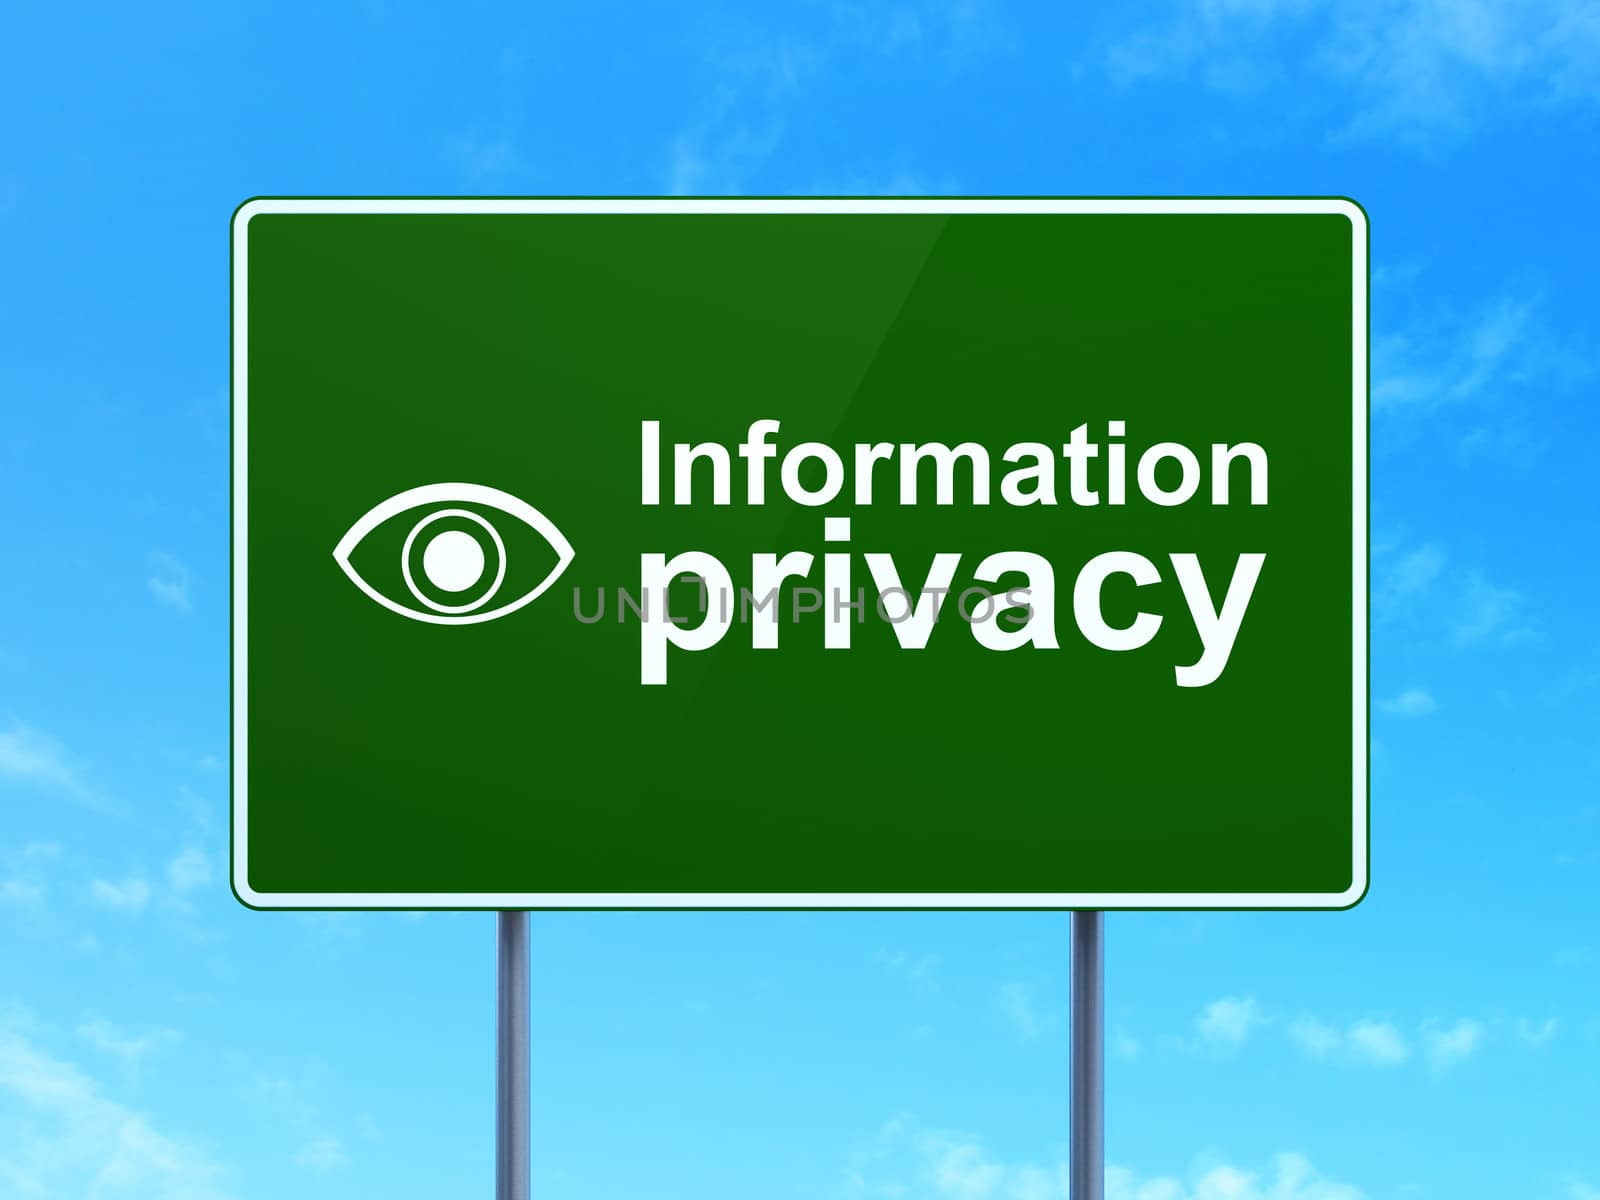 Protection concept: Information Privacy and Eye icon on green road (highway) sign, clear blue sky background, 3d render